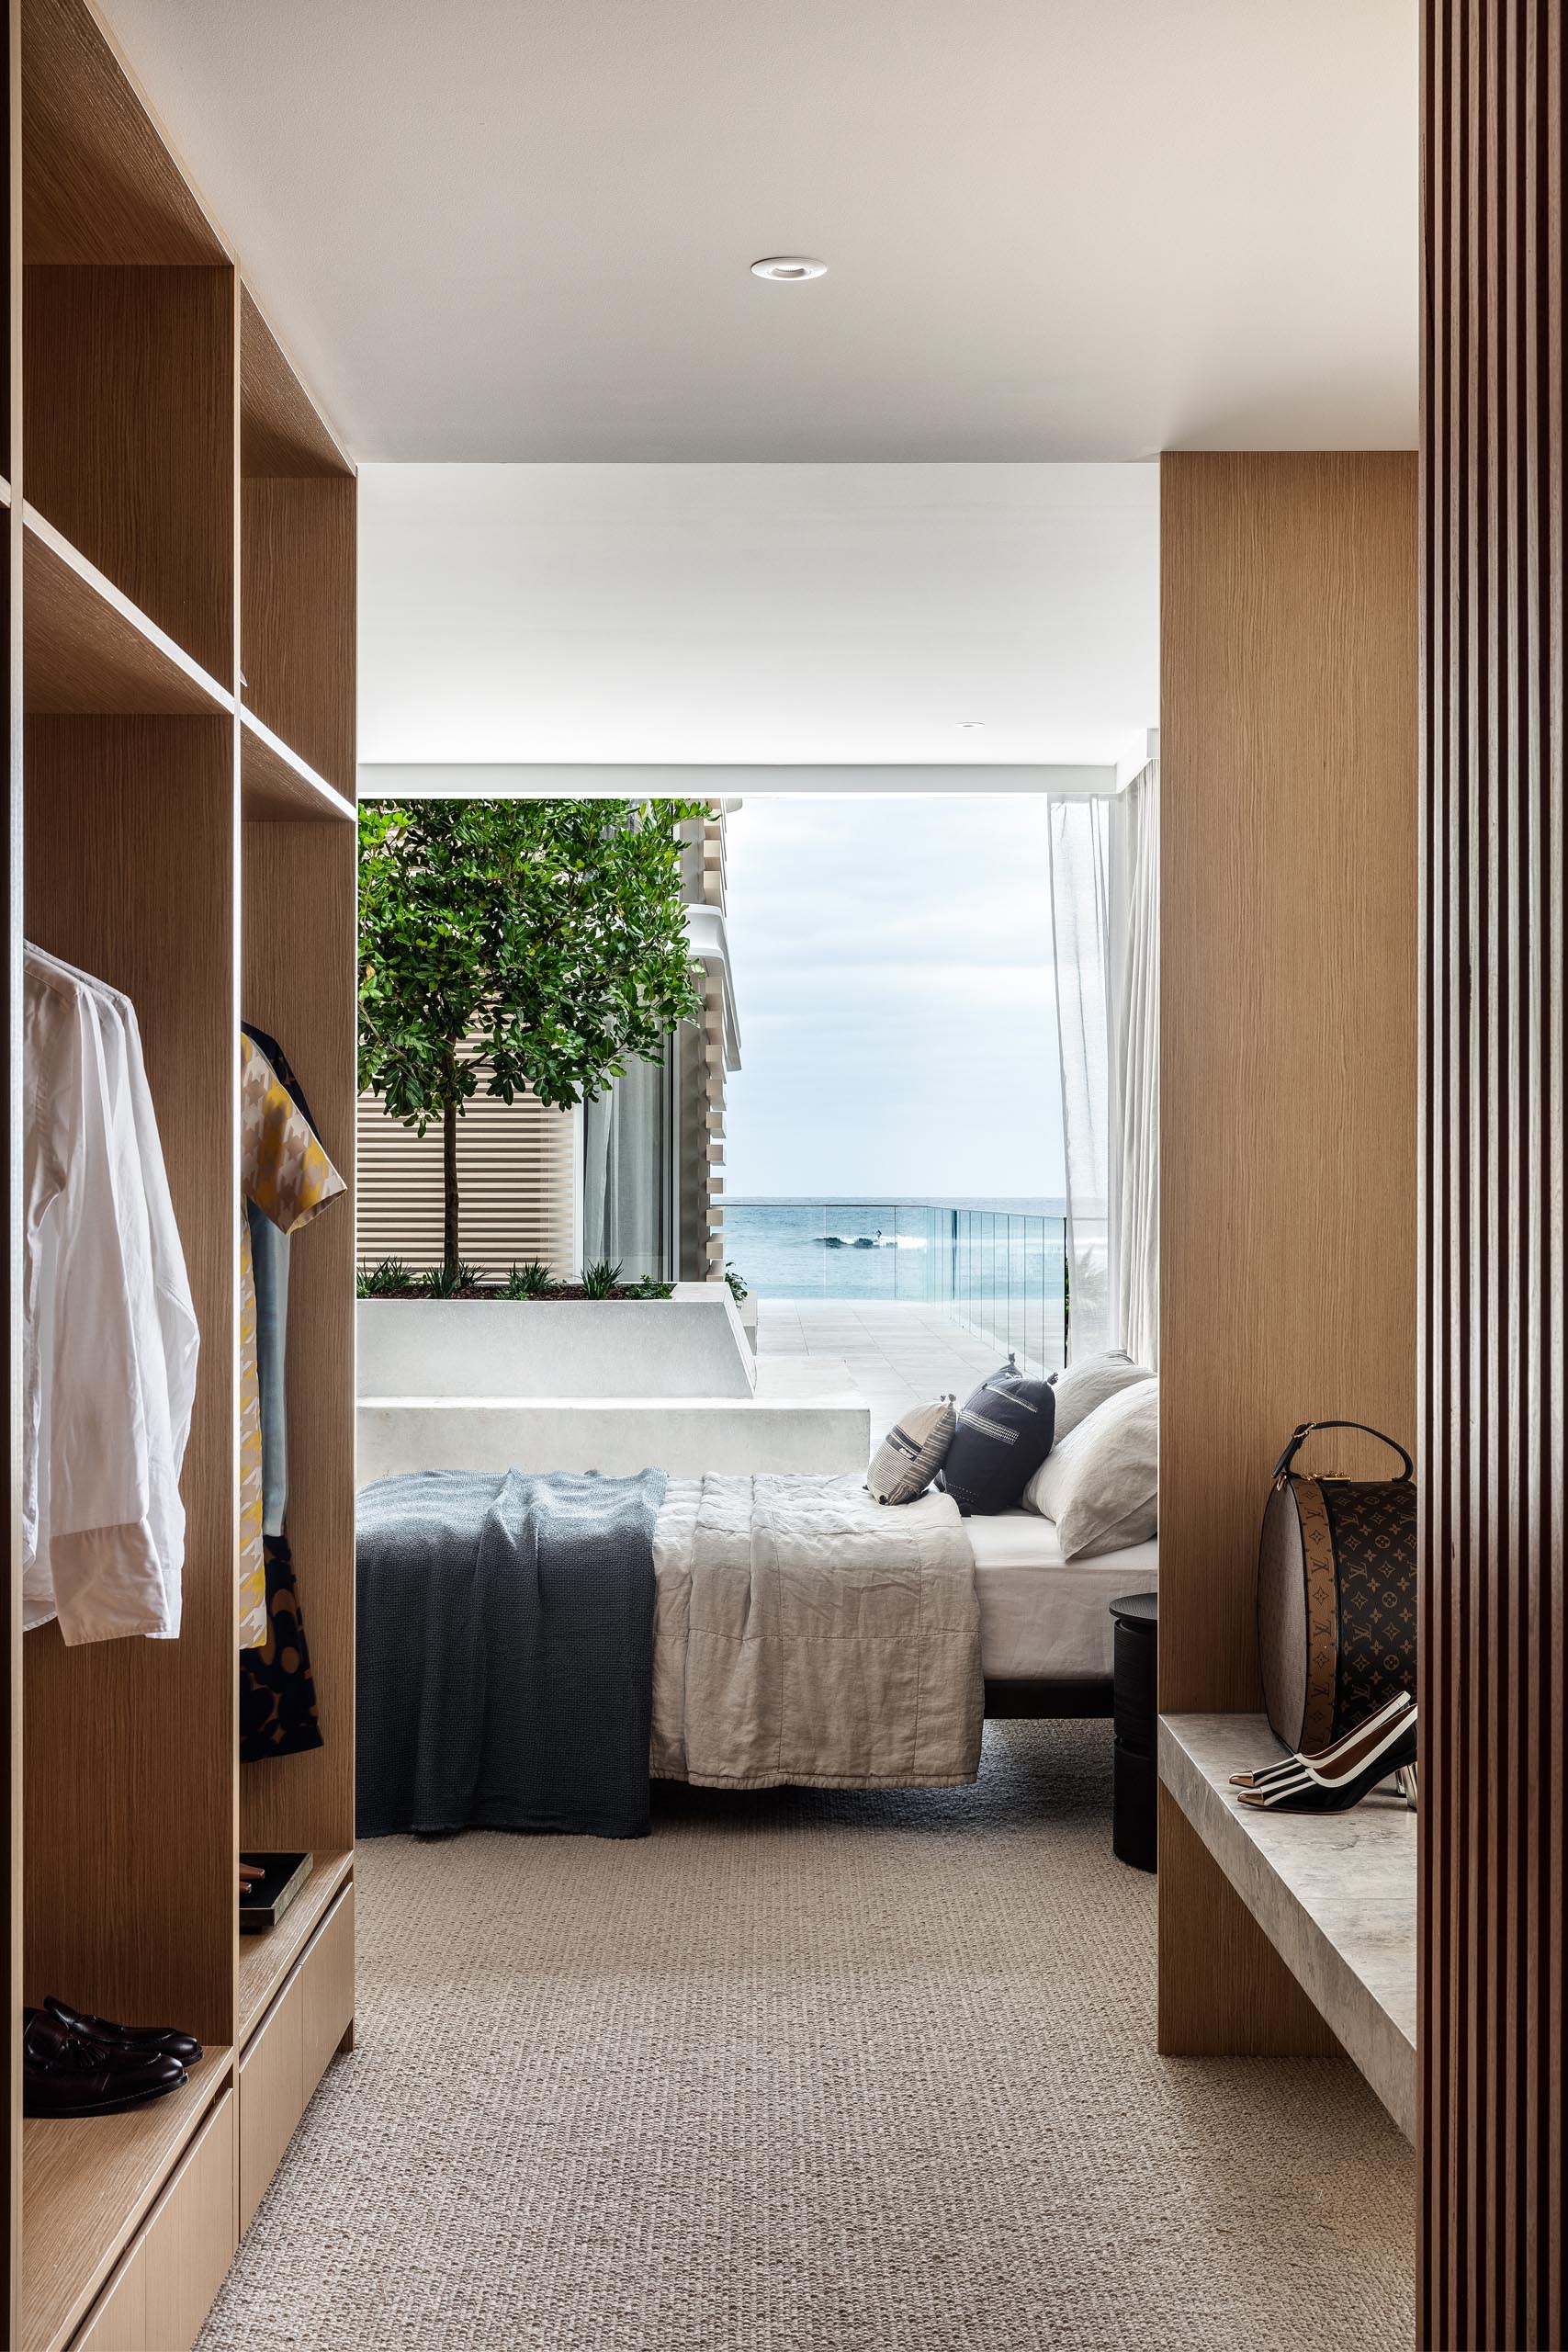 This modern walk-in closet has plenty of storage for clothes, and also includes a stone bench by the window.